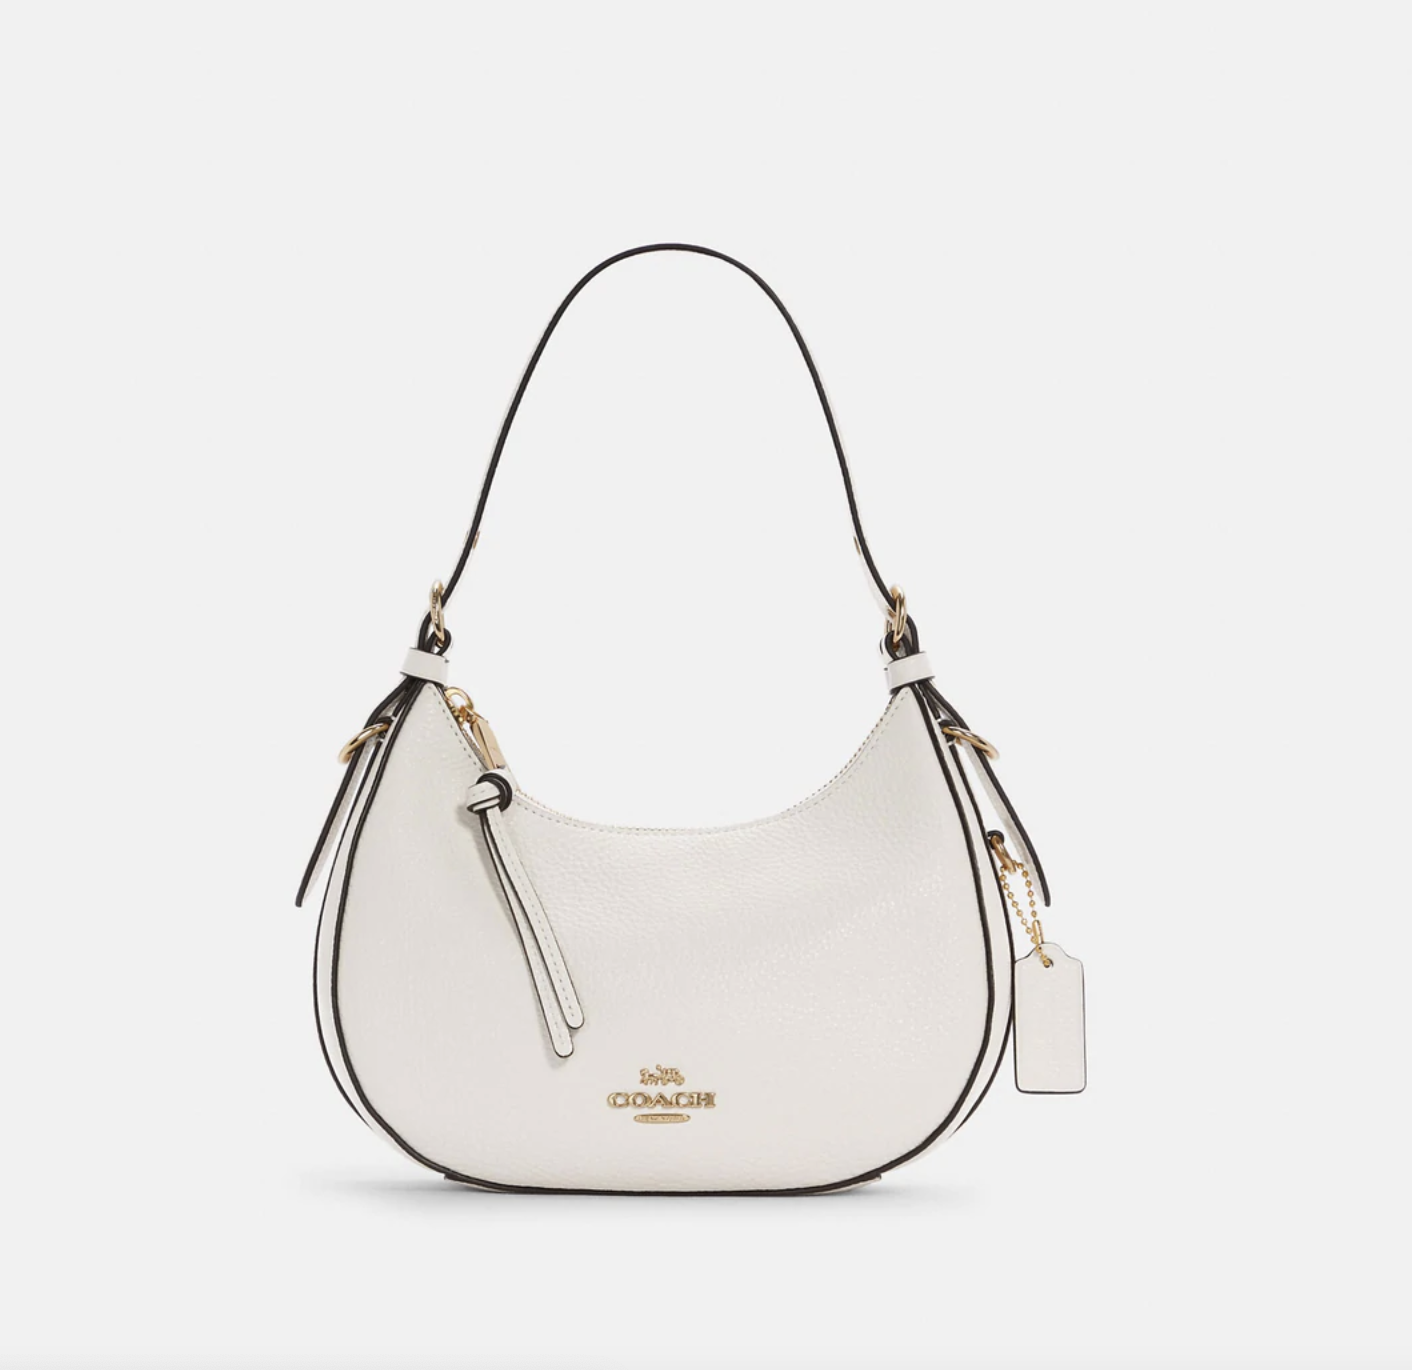 Shoppremiumoutlets: Up to 70% off +extra 15% off coach